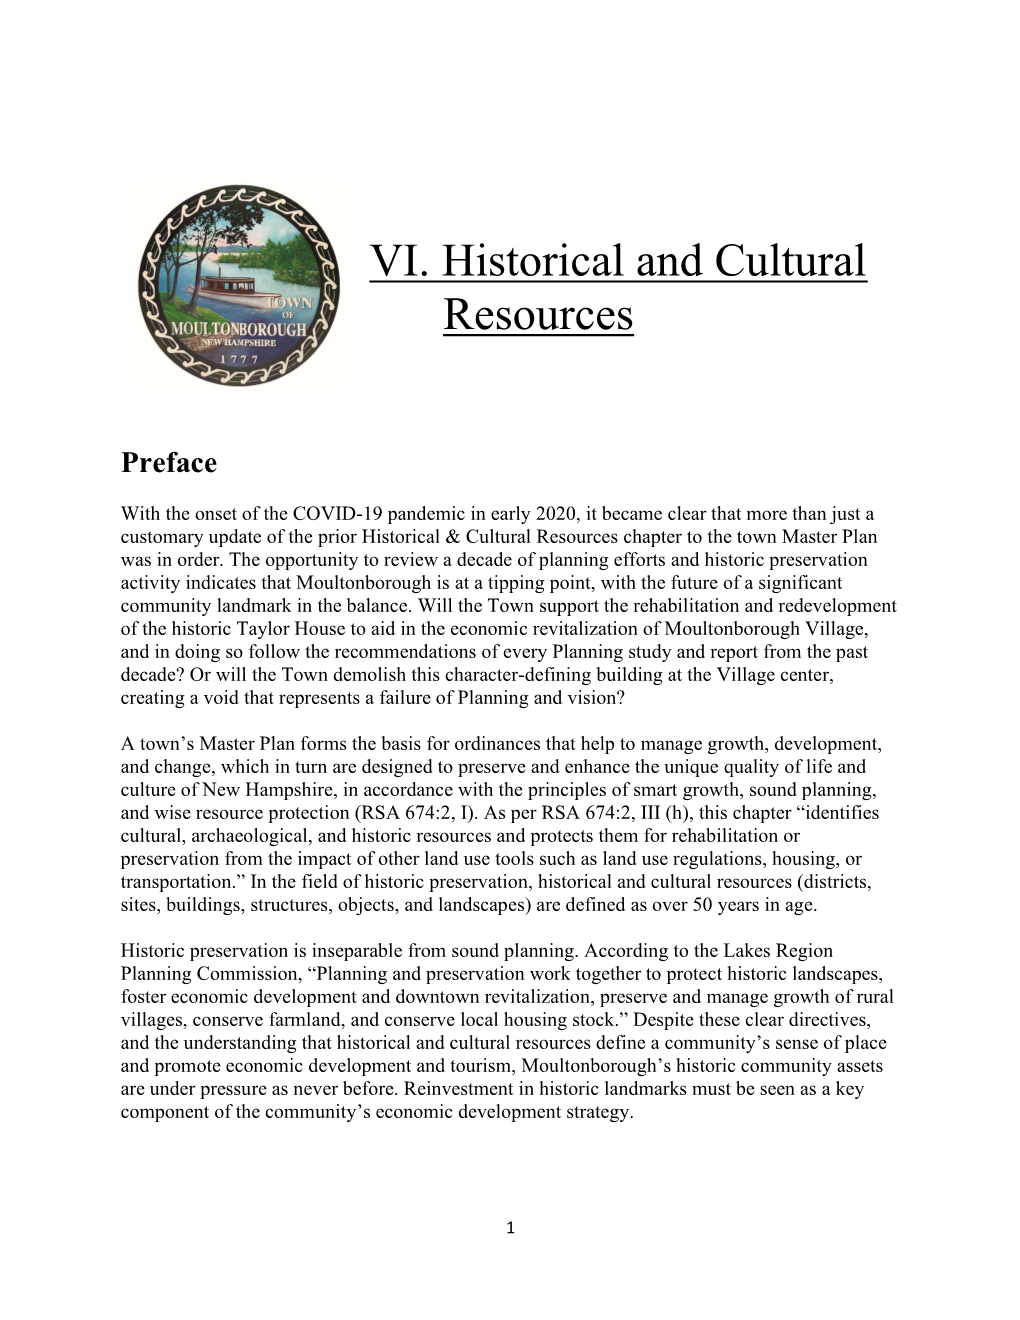 Historical and Cultural Resources Chapter